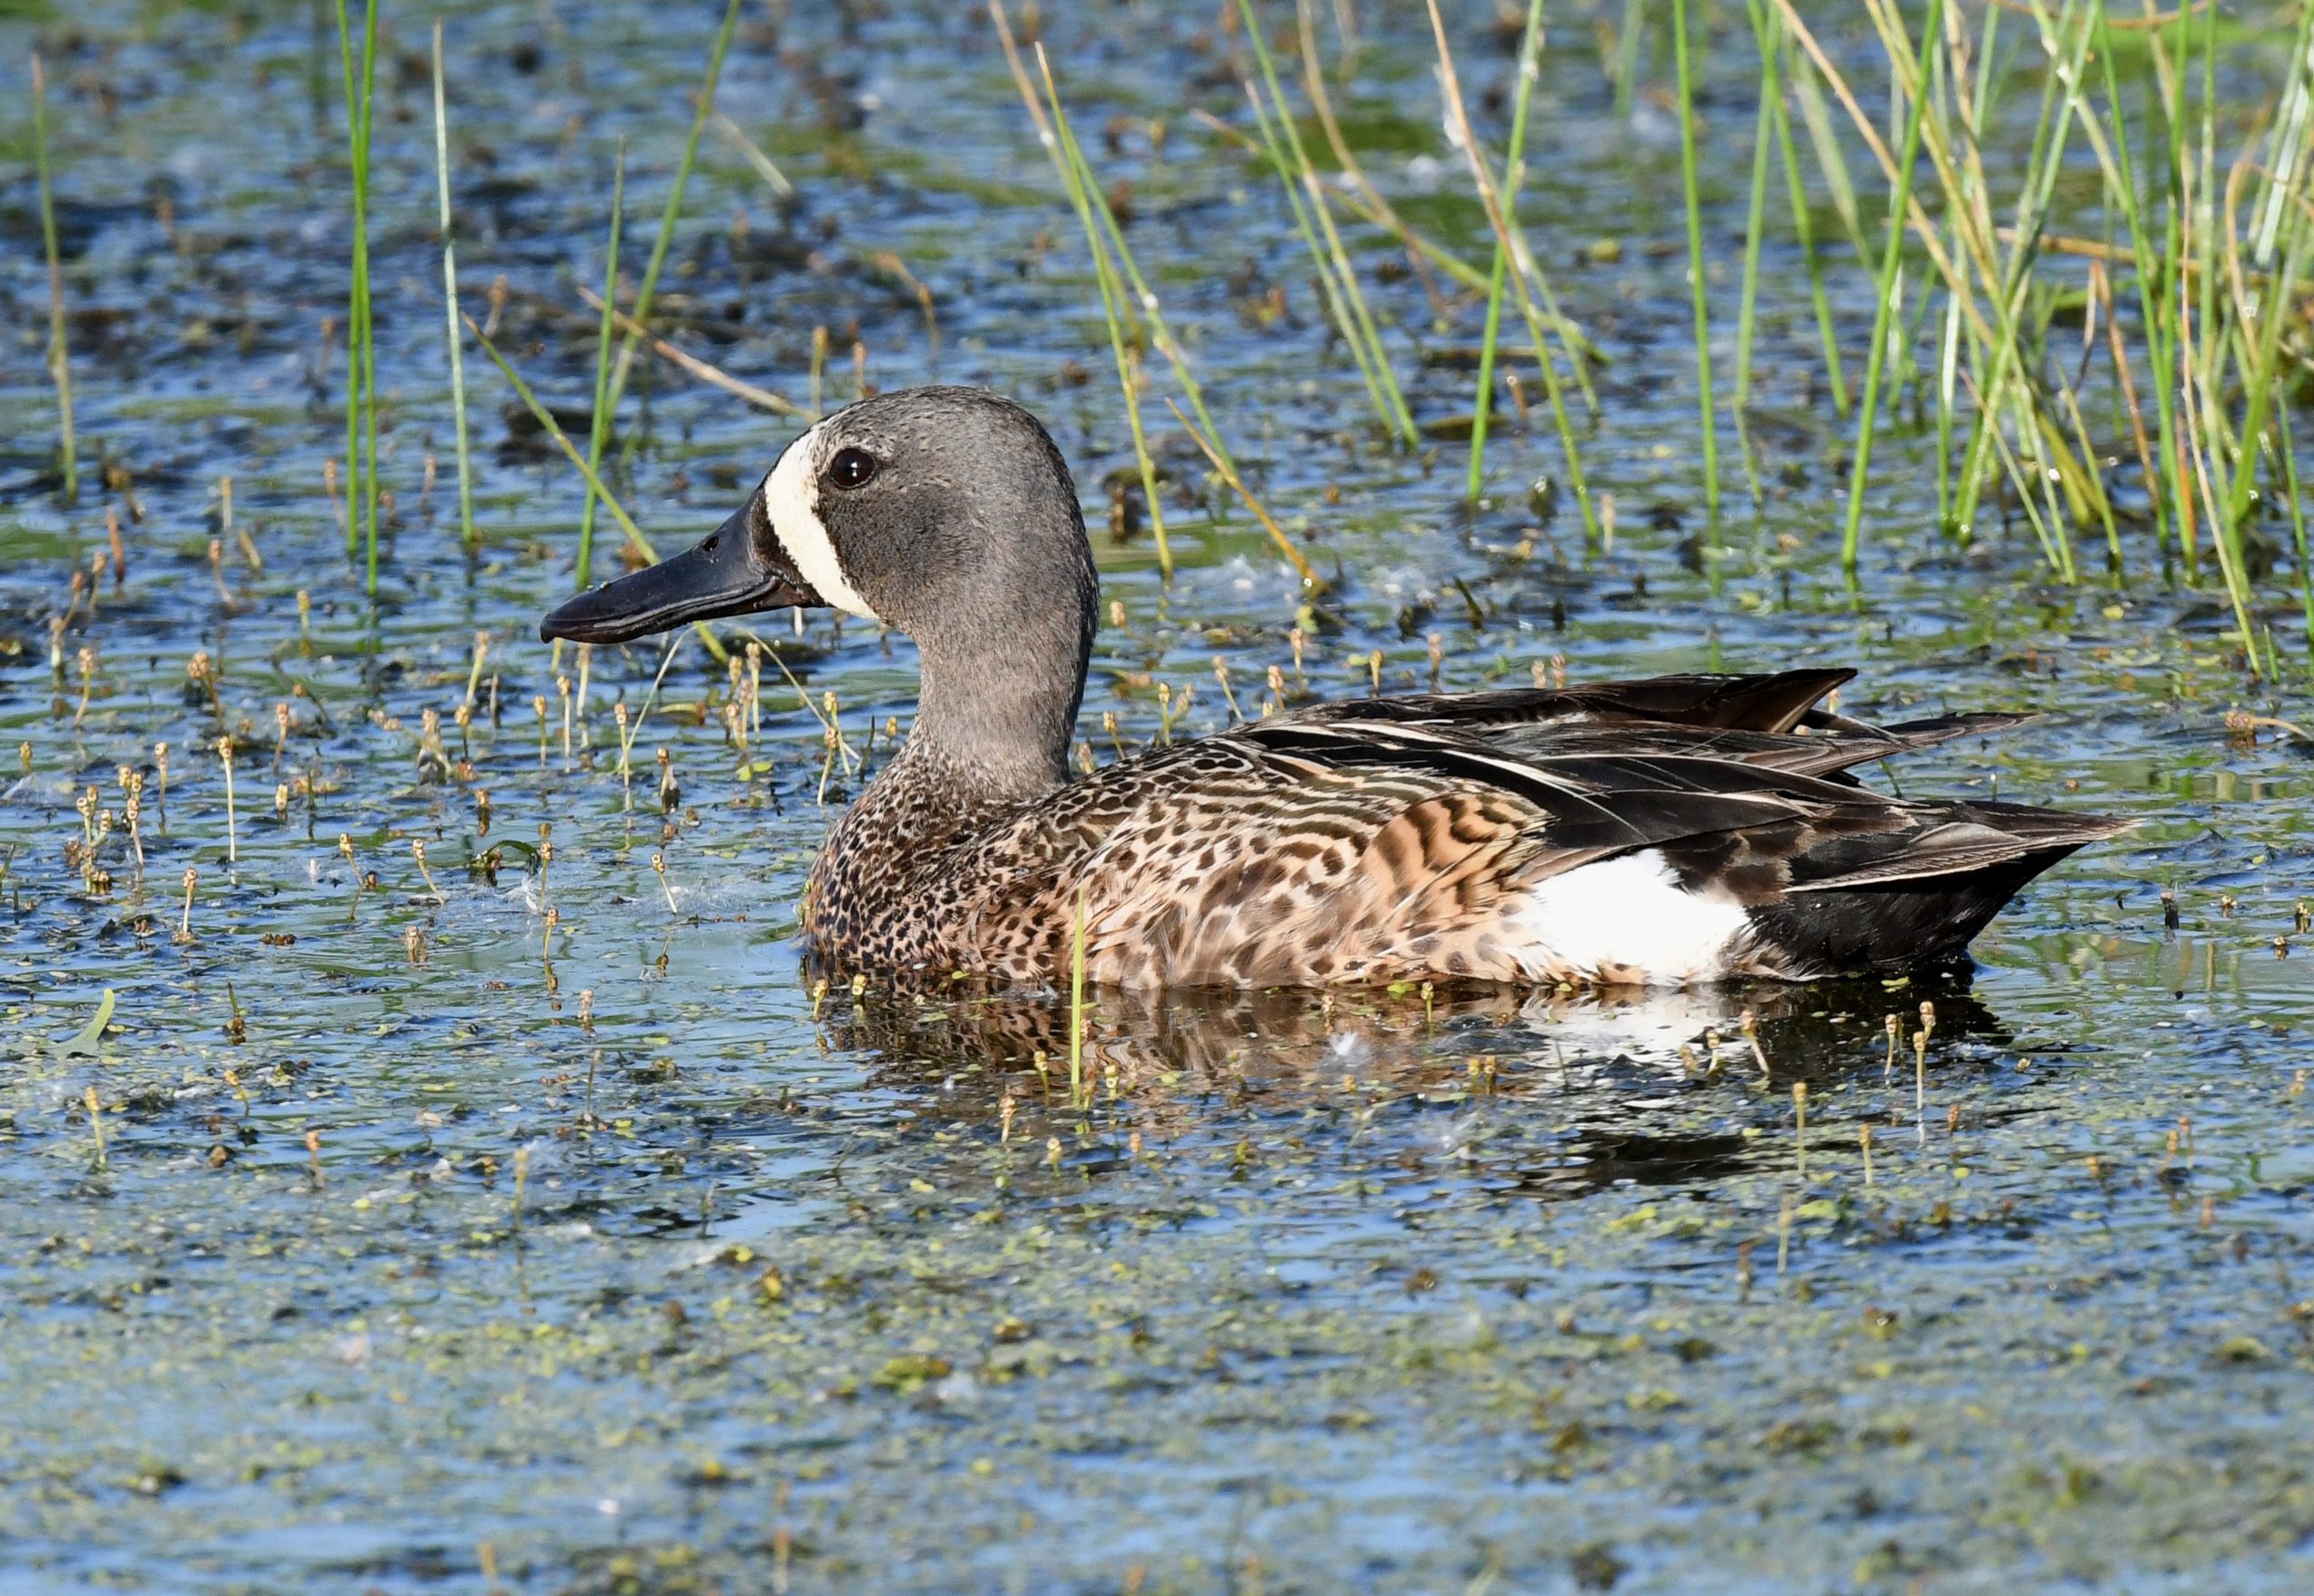 A water fowl with feathers of black, white, gray, and brown is sitting in the water.